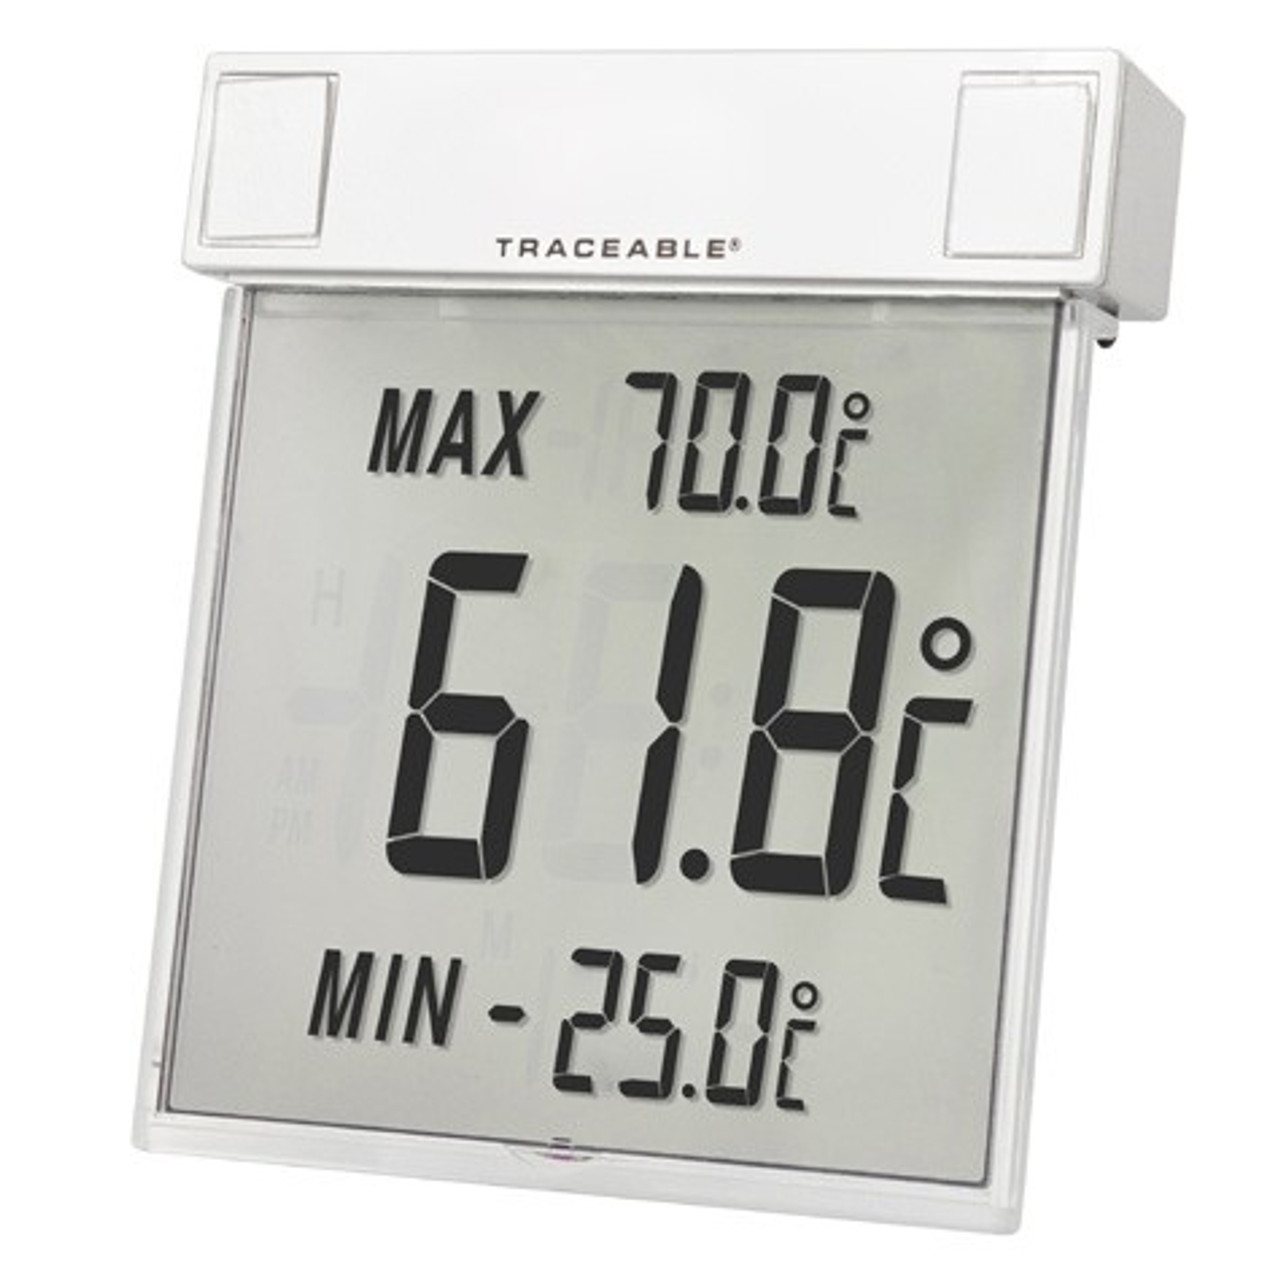 https://cdn11.bigcommerce.com/s-48gxyyxkag/images/stencil/1280x1280/products/25962/68792/Control_Company_4160_Traceable_Big-Digit_See-Thru_Thermometer_-_CON4160__03136.1660332190.jpg?c=1